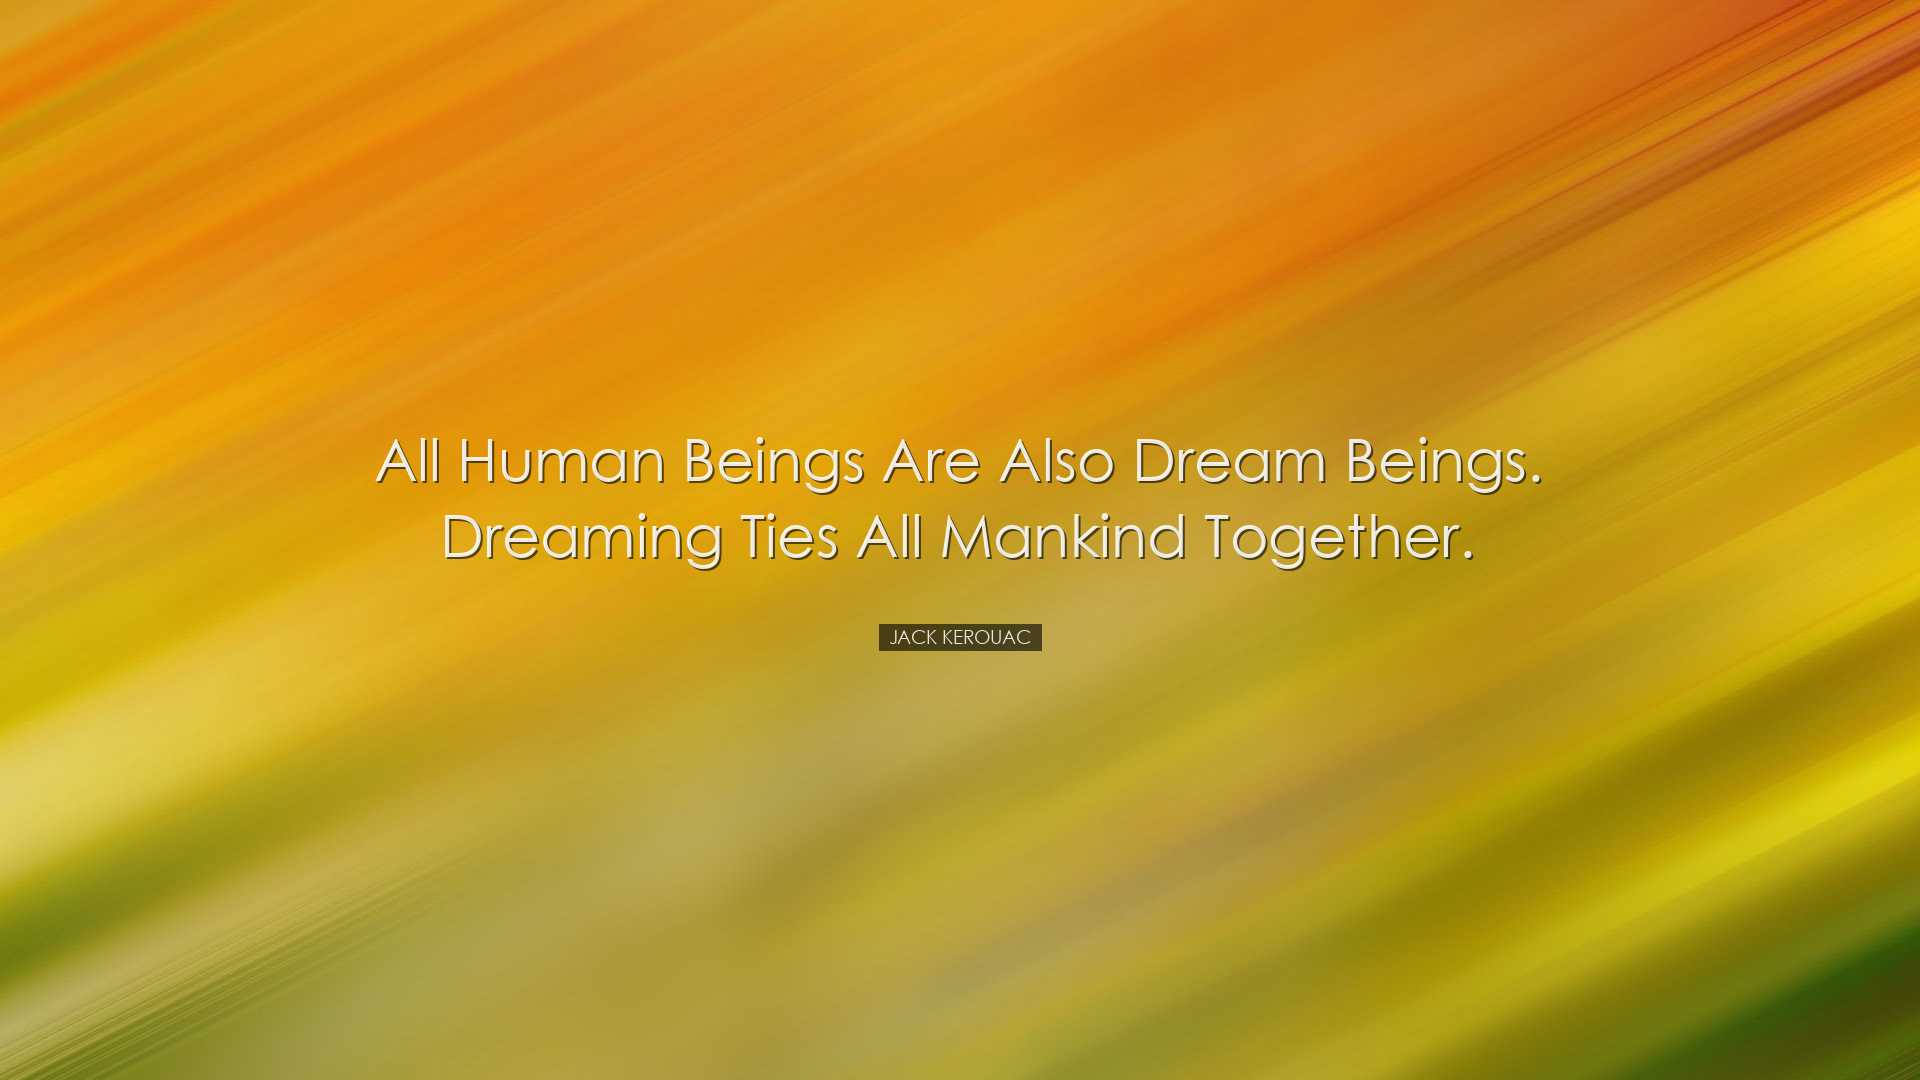 All human beings are also dream beings. Dreaming ties all mankind